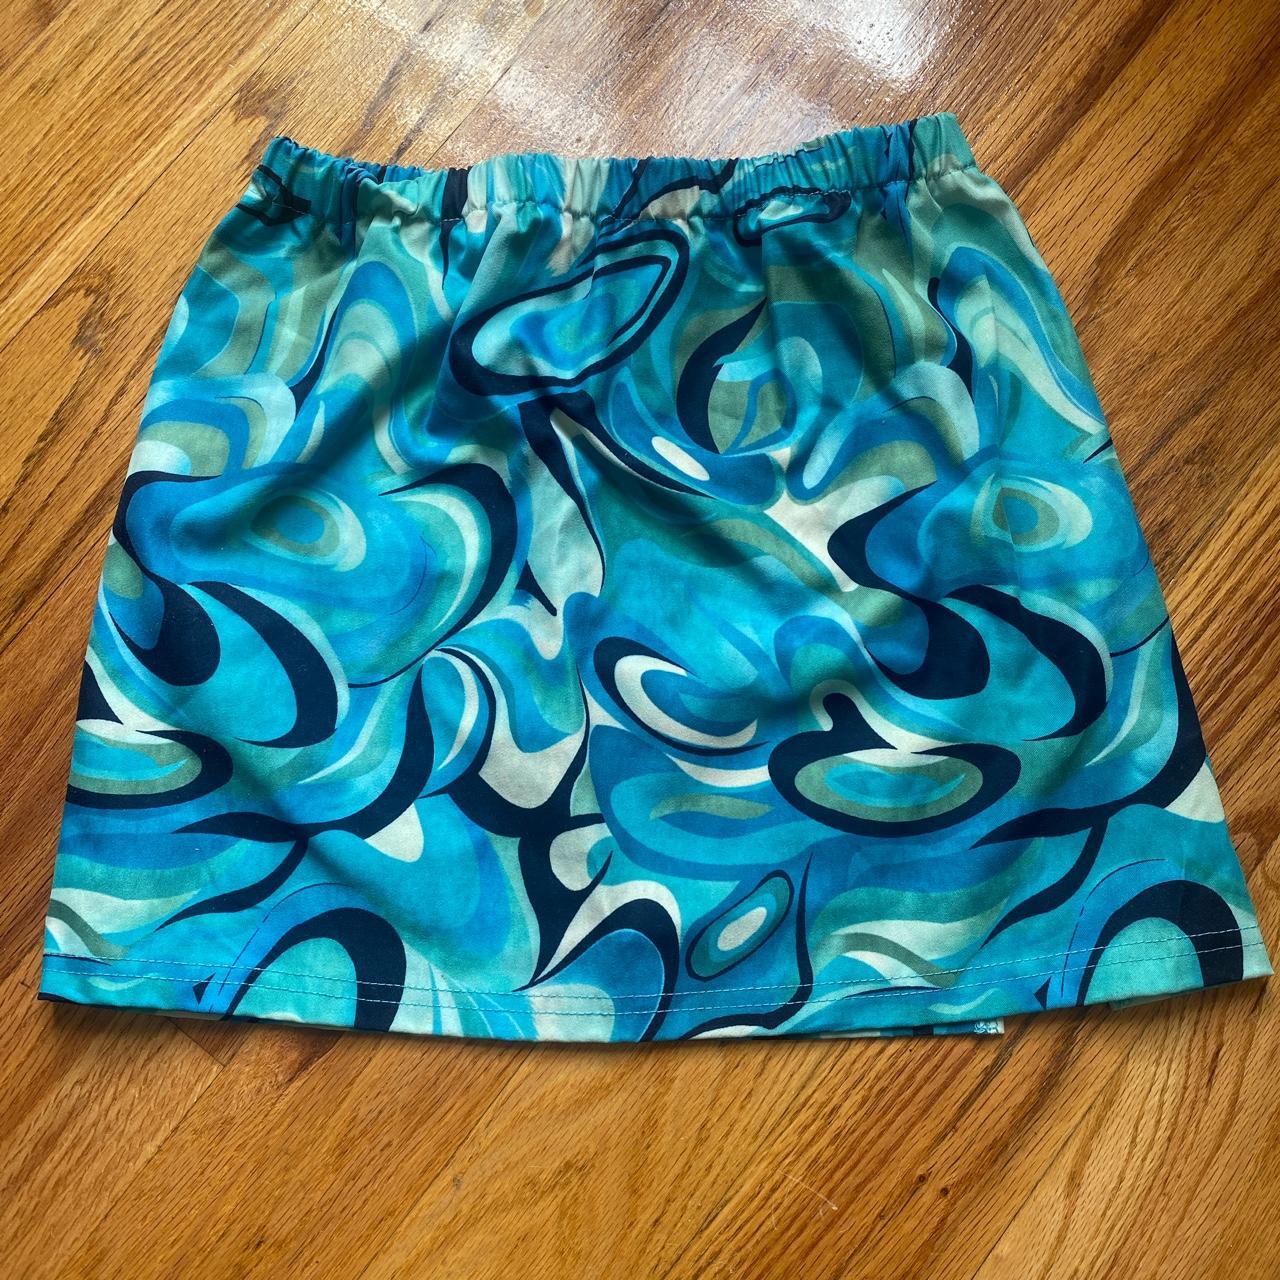 Swirl mini skirt Perfect mini for going out,... - Depop